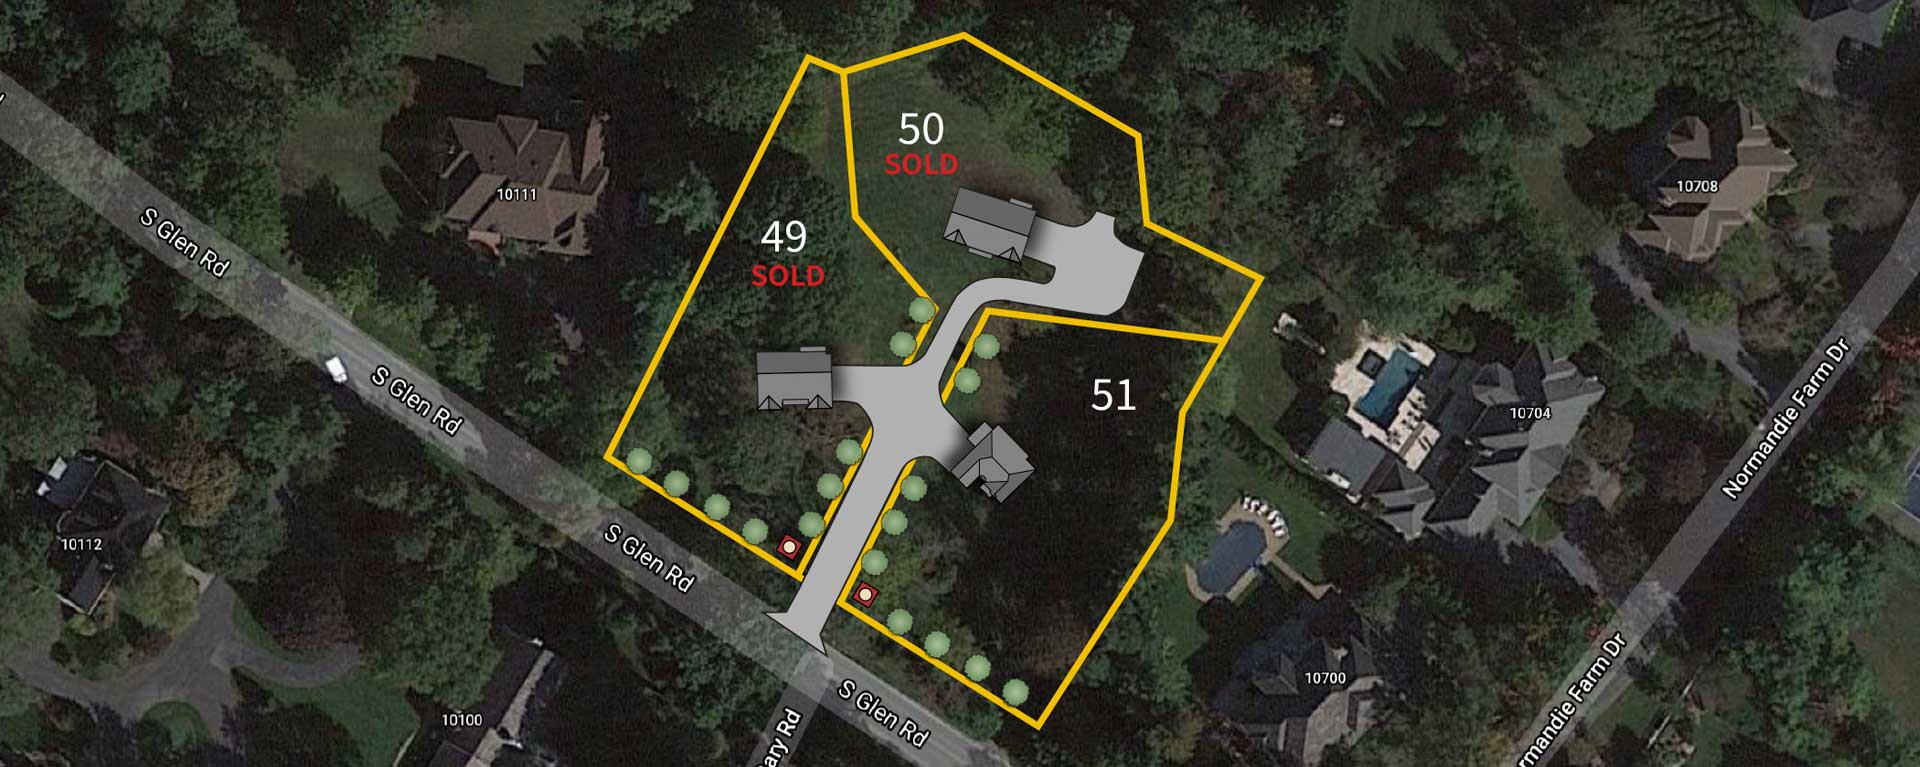 An aerial satellite image showing a three lot subdivision lot outline superimposed with proposed house placement, lots 49 and 50 marked SOLD